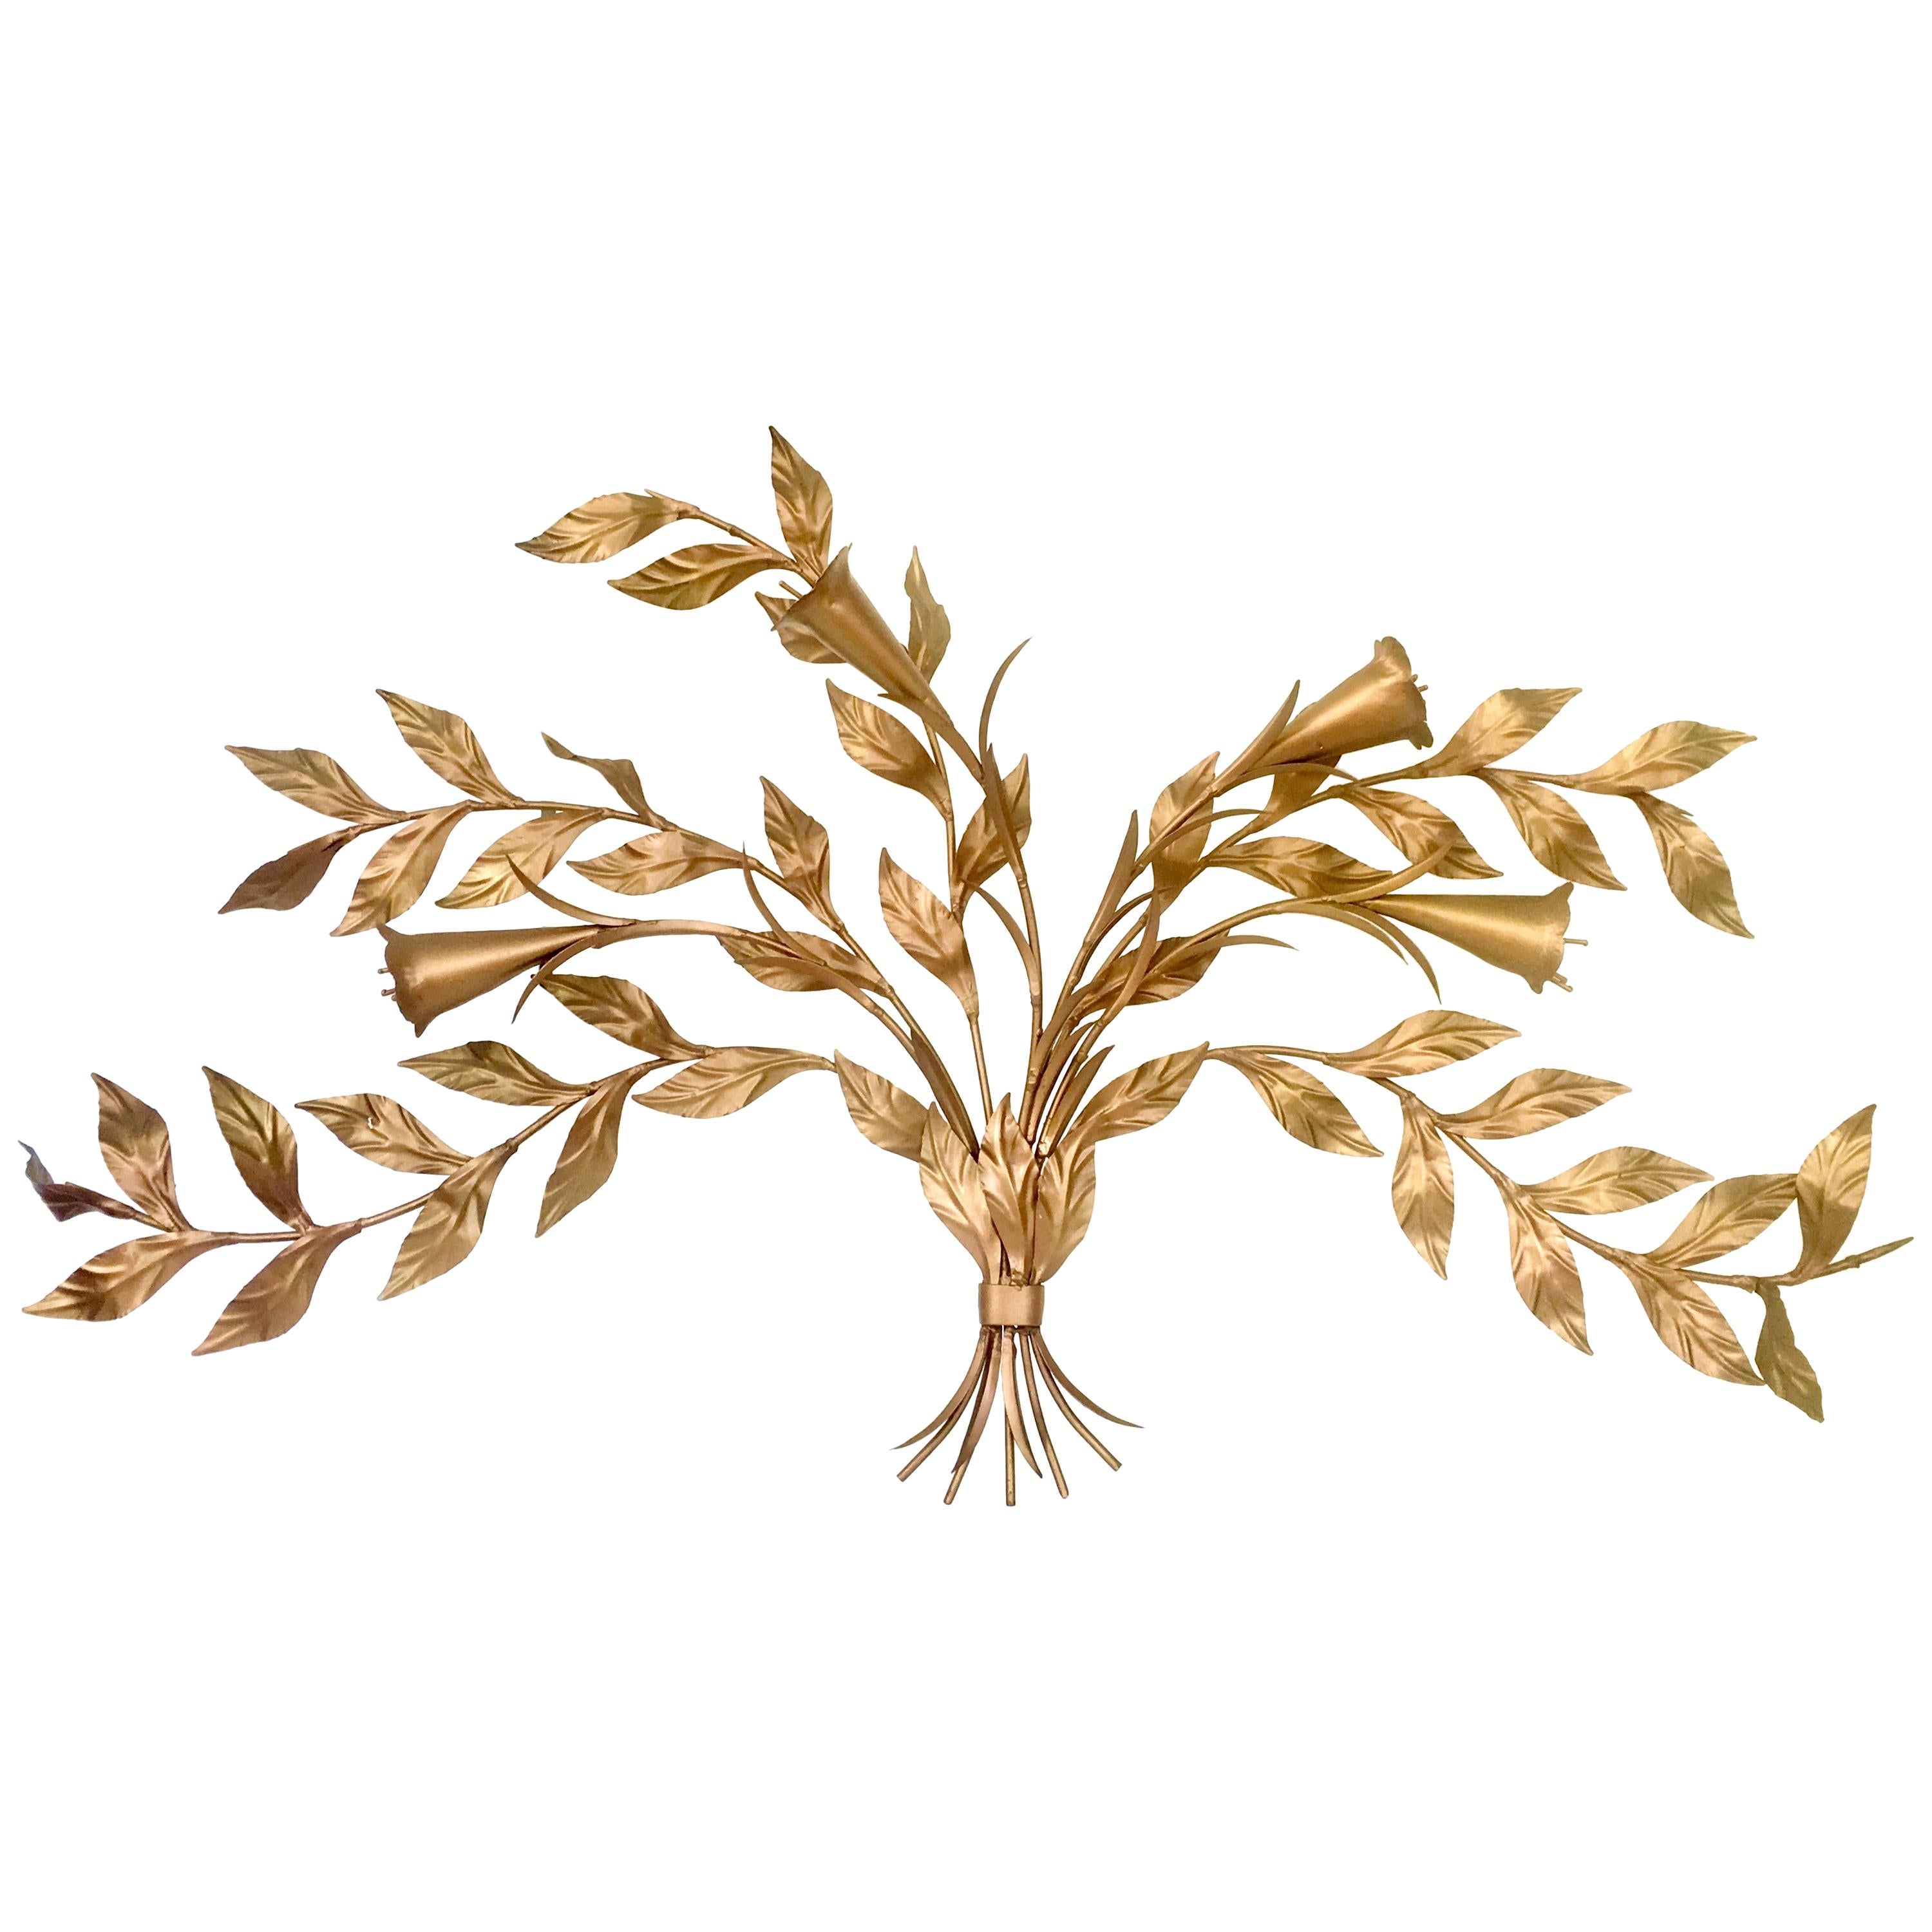 1950'S Monumental Italian Gold Floral Sheaf Wall Sculpture By Florentia For Sale